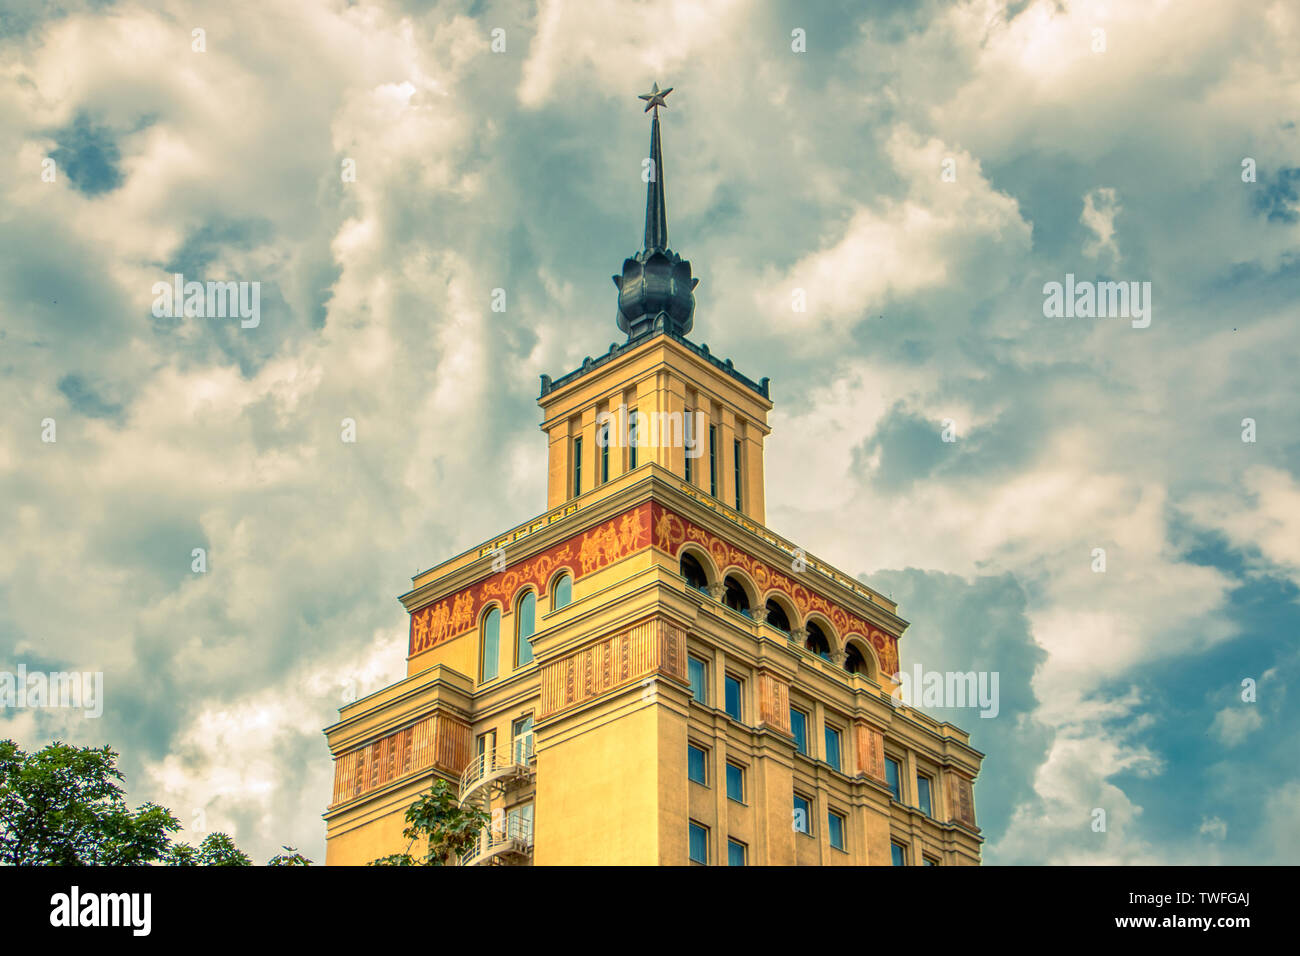 Prague June 20, 2019 - Hotel International Prague under sunny day and clouds with warm light hdr Stock Photo